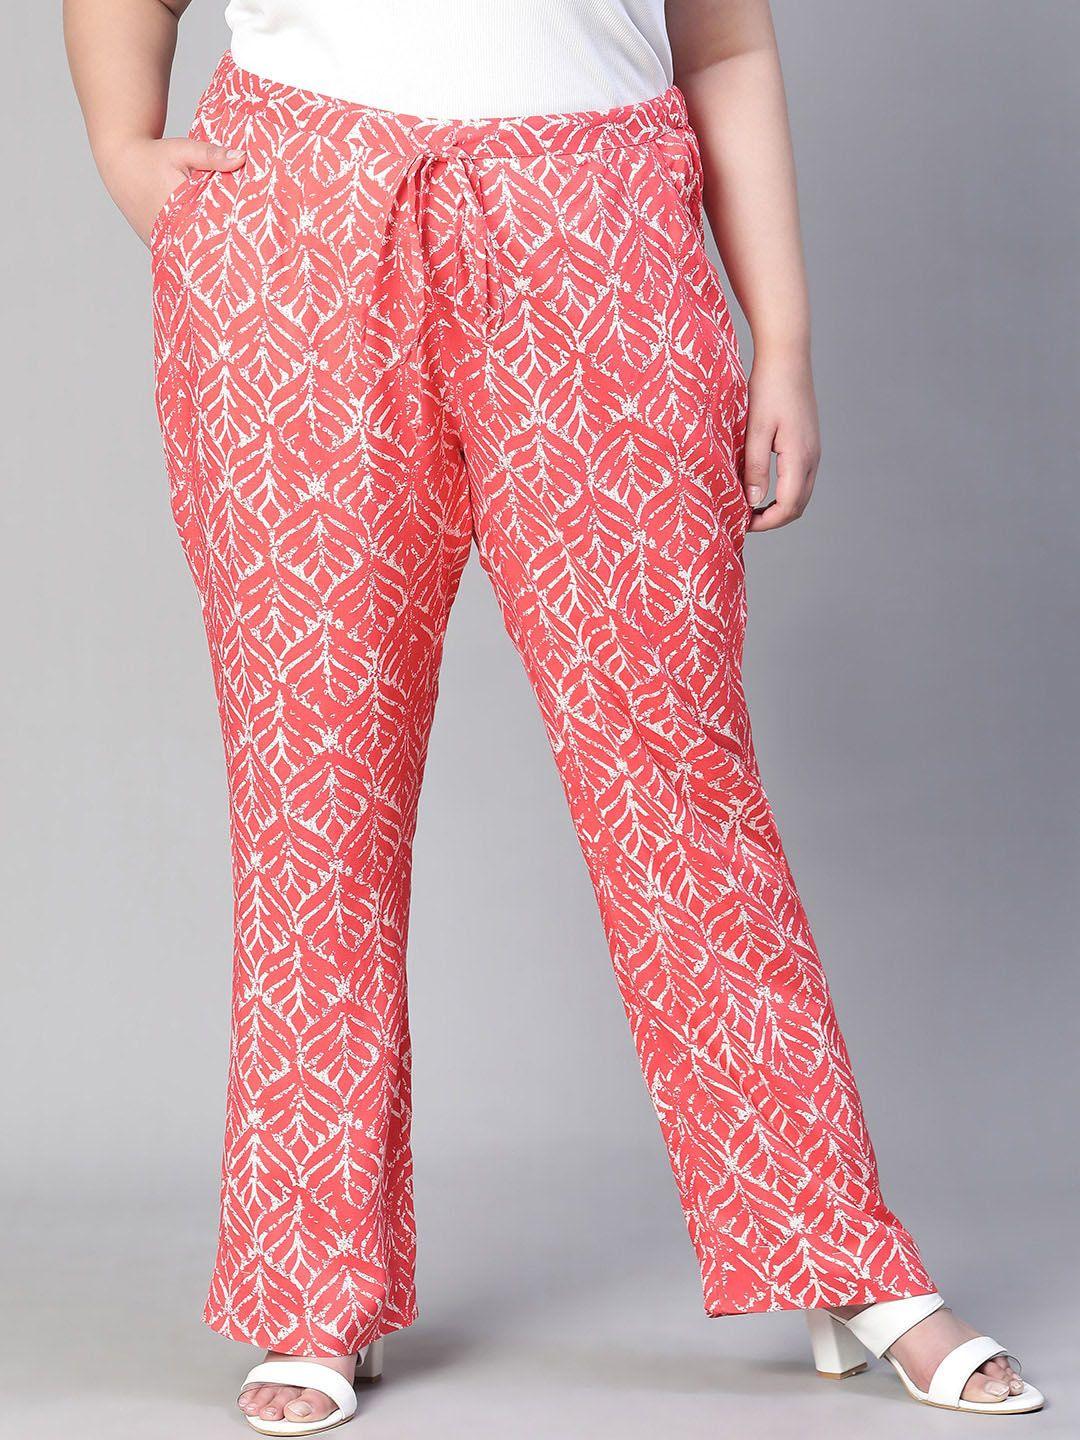 oxolloxo women plus size floral printed relaxed straight fit easy wash trousers